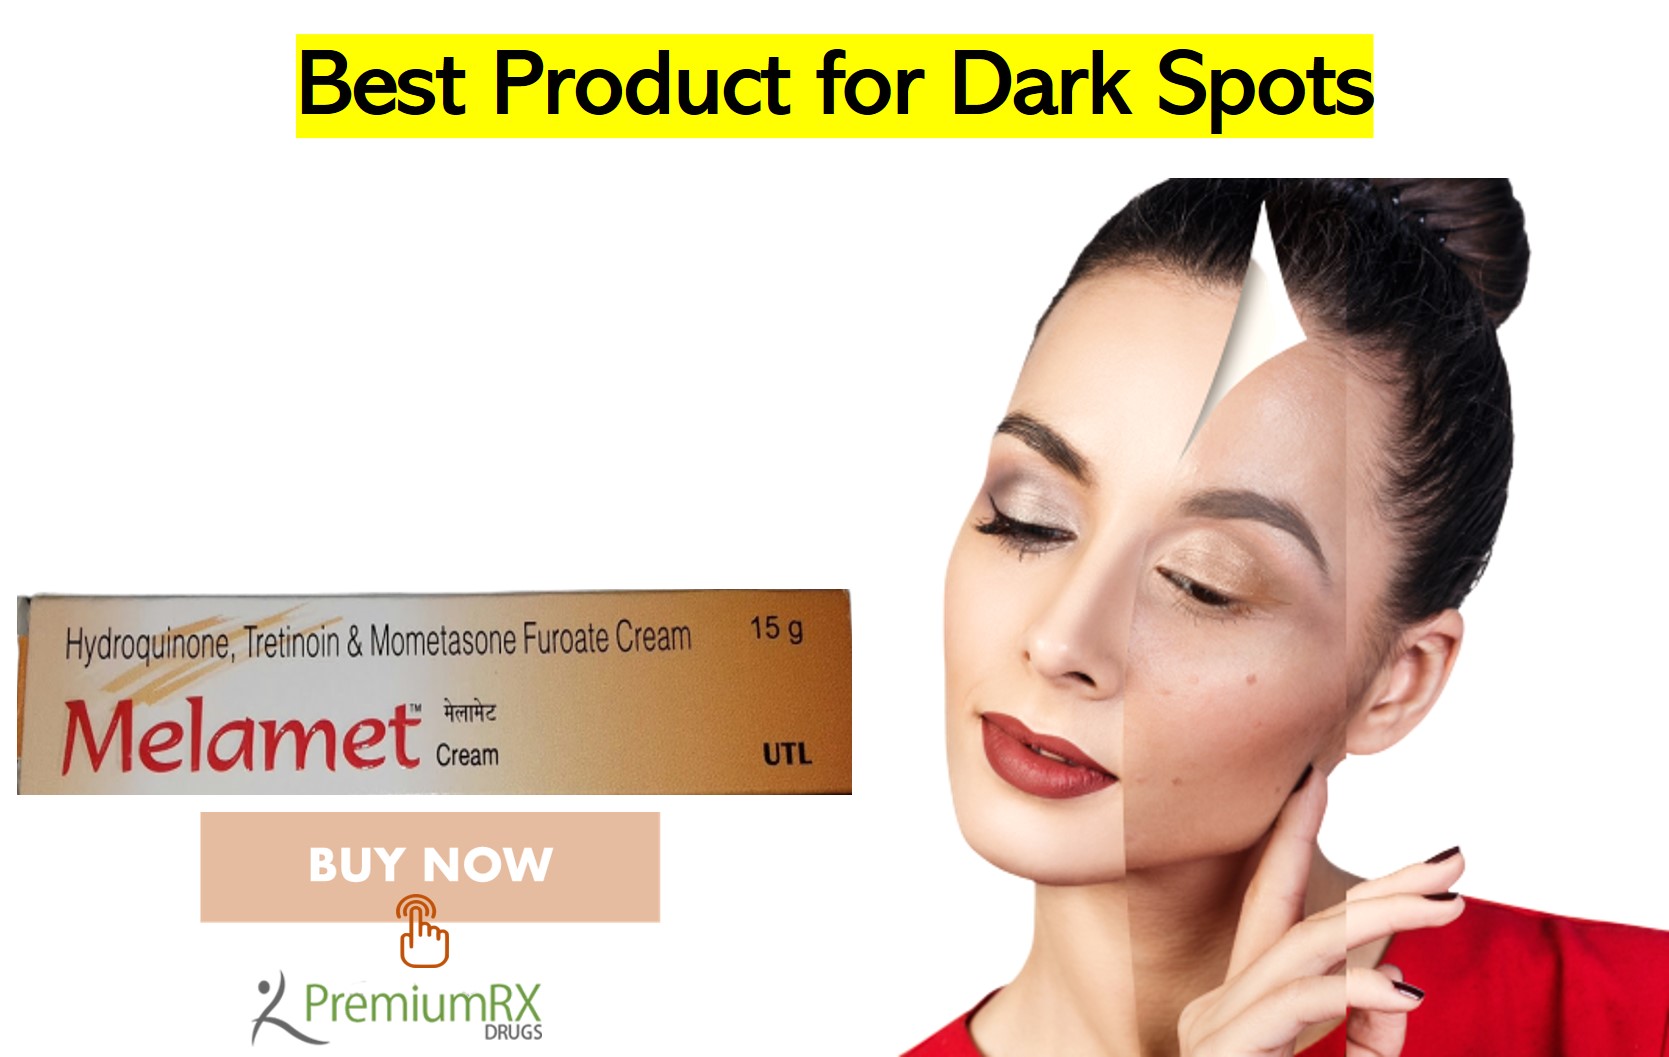 What is the Best Product for Dark Spots